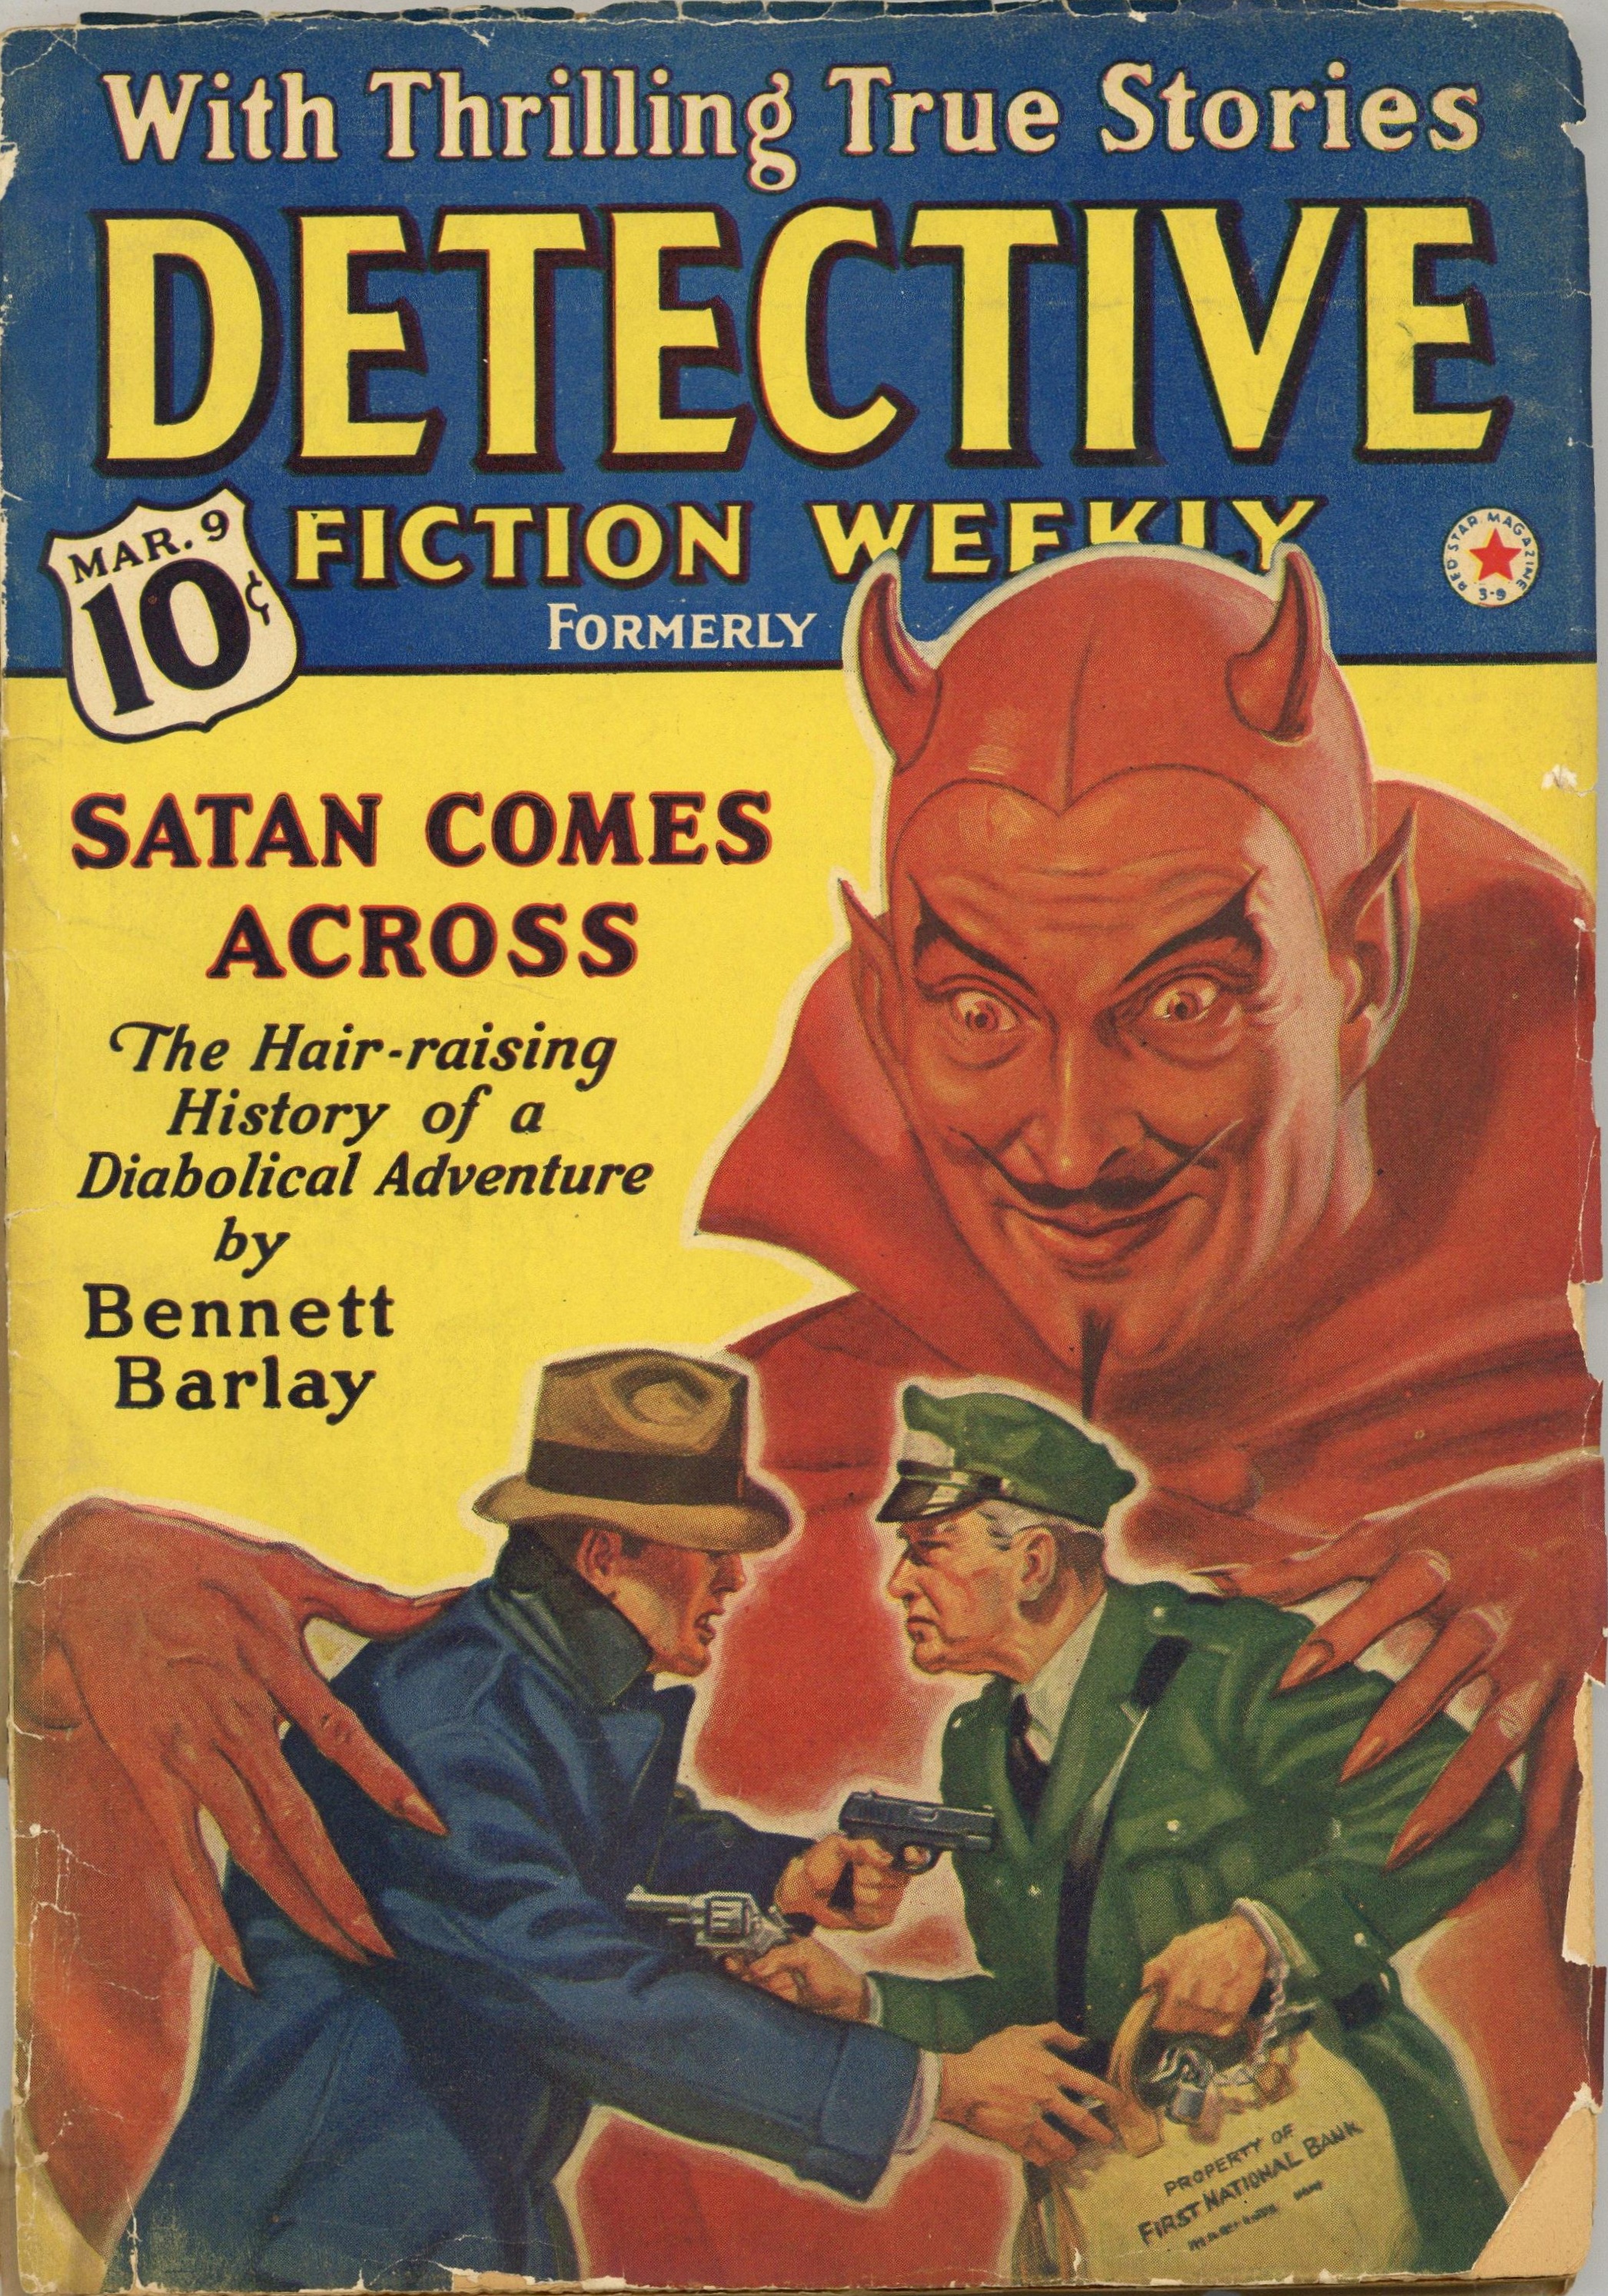 Detective Fiction Weekly March 9, 1940